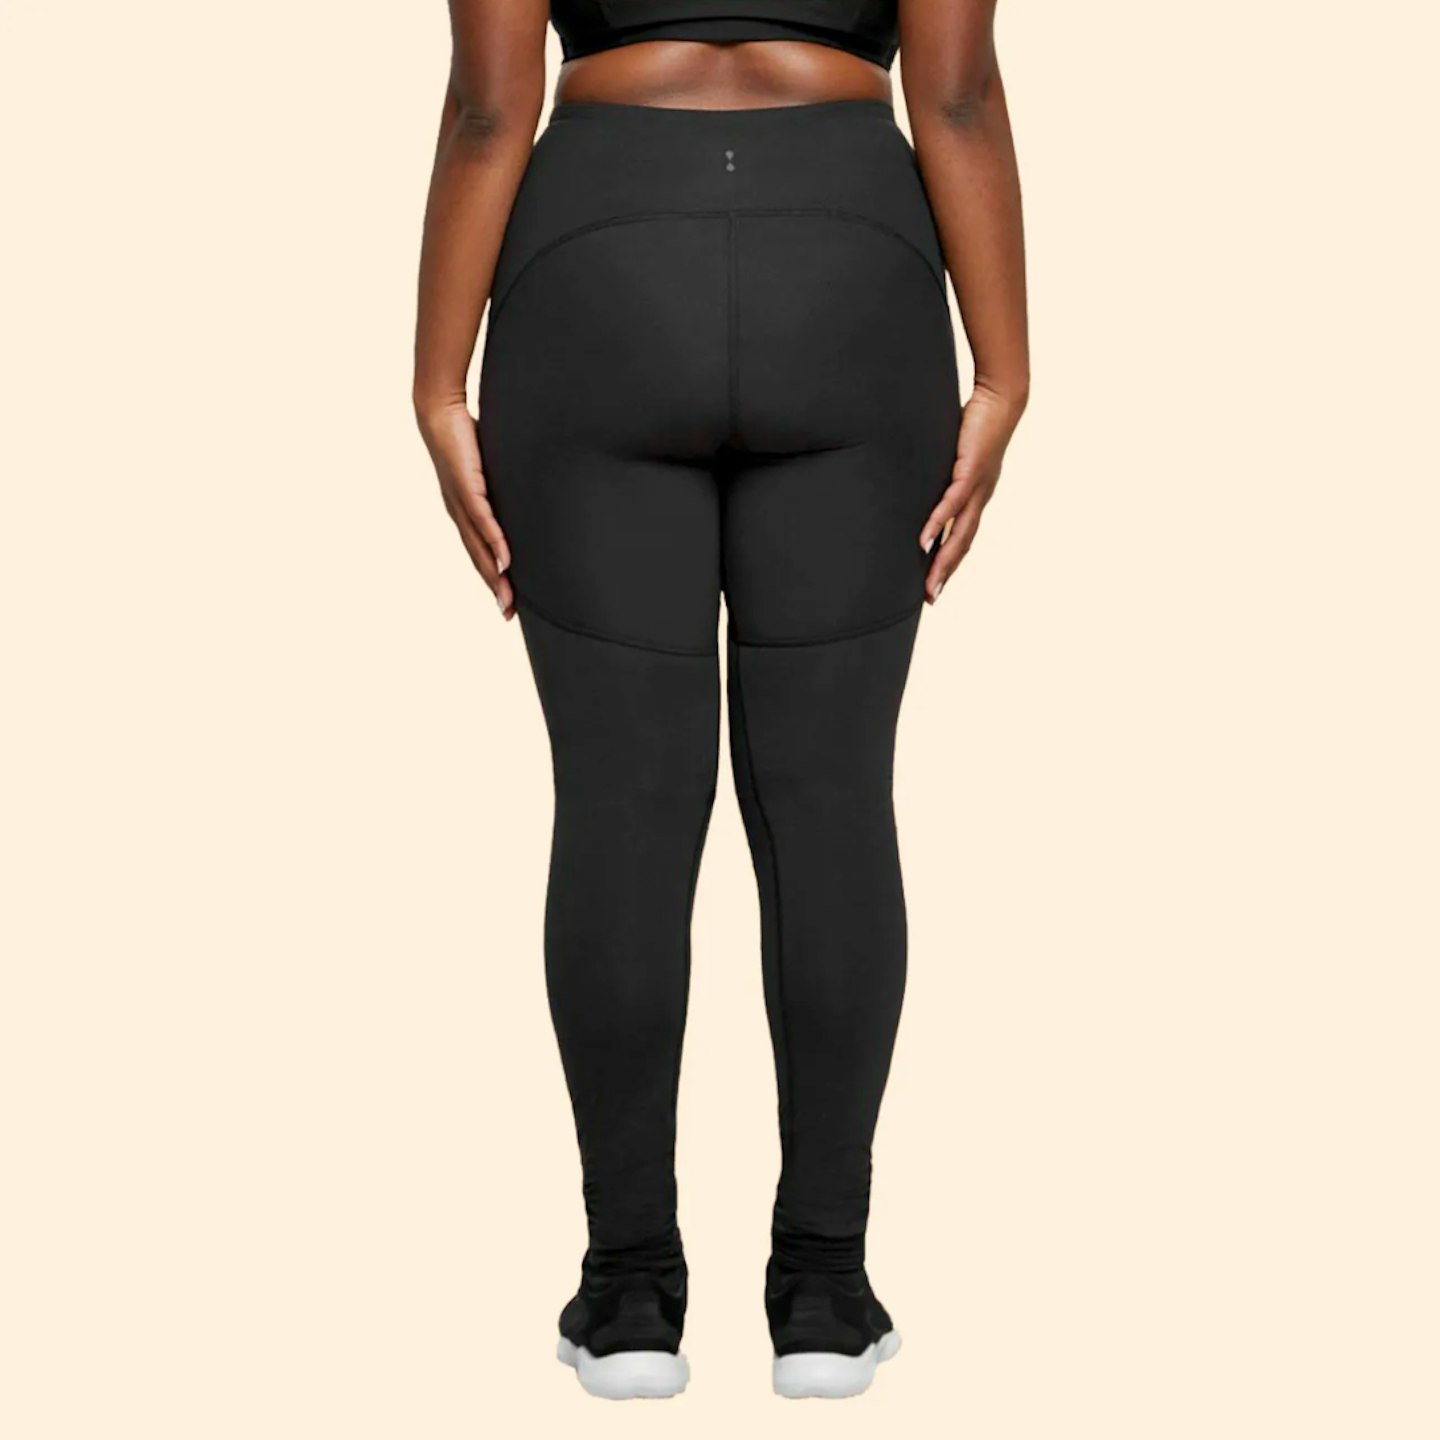 Period Gym Leggings Exist and They Are a Game-Changer